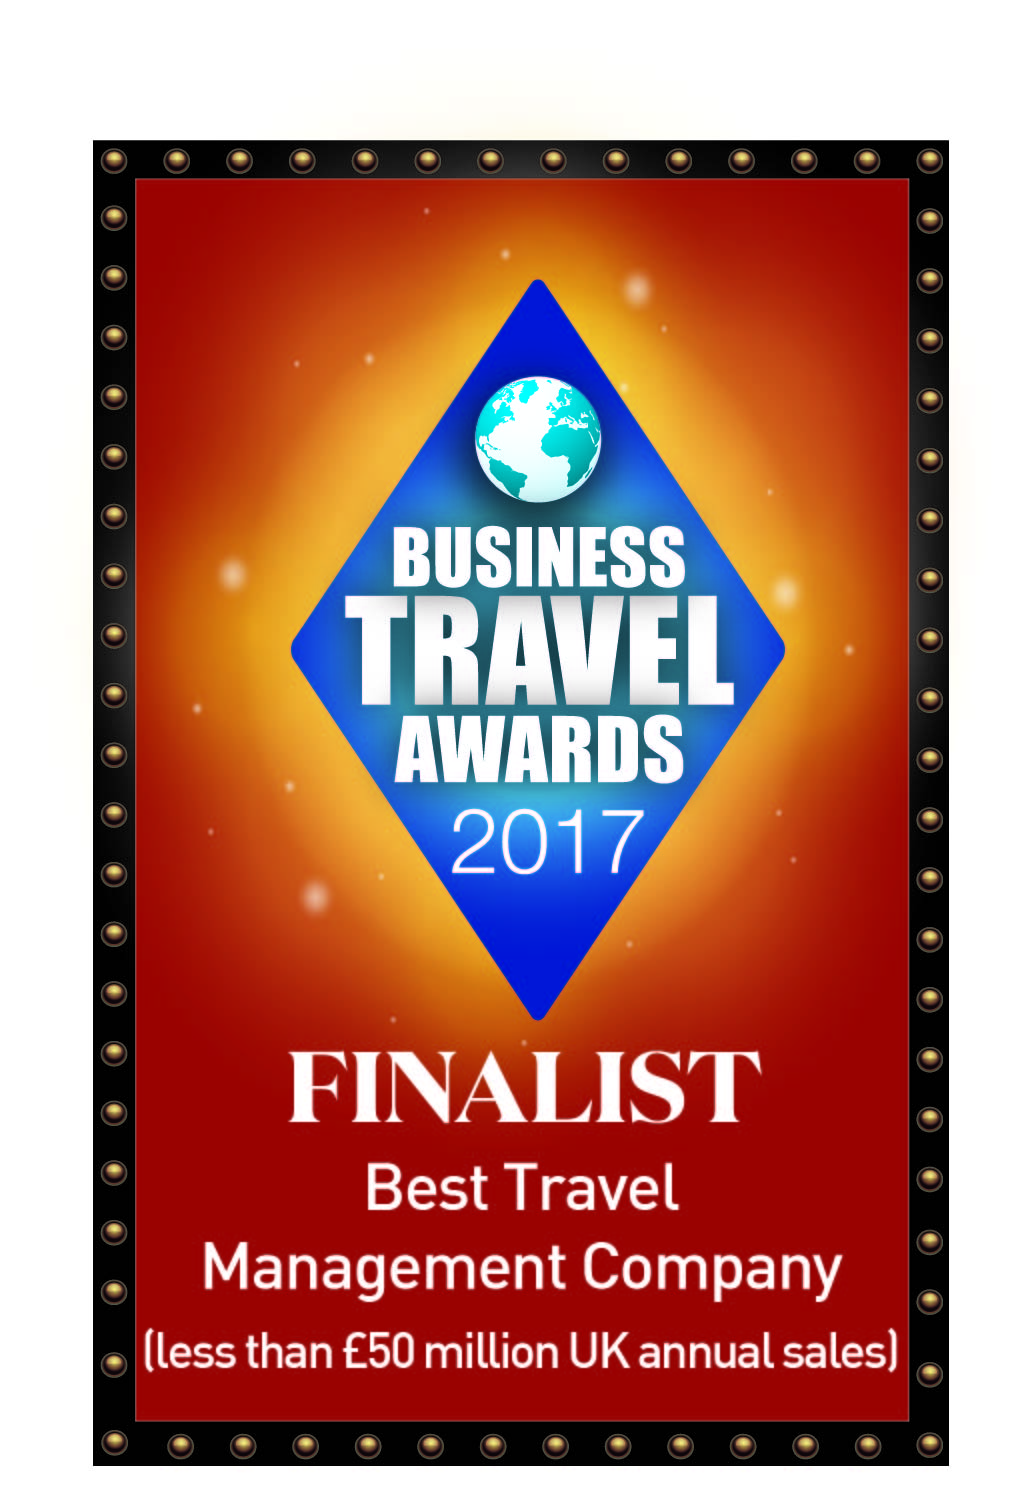 More exciting news for Good Travel Management as it’s shortlisted for